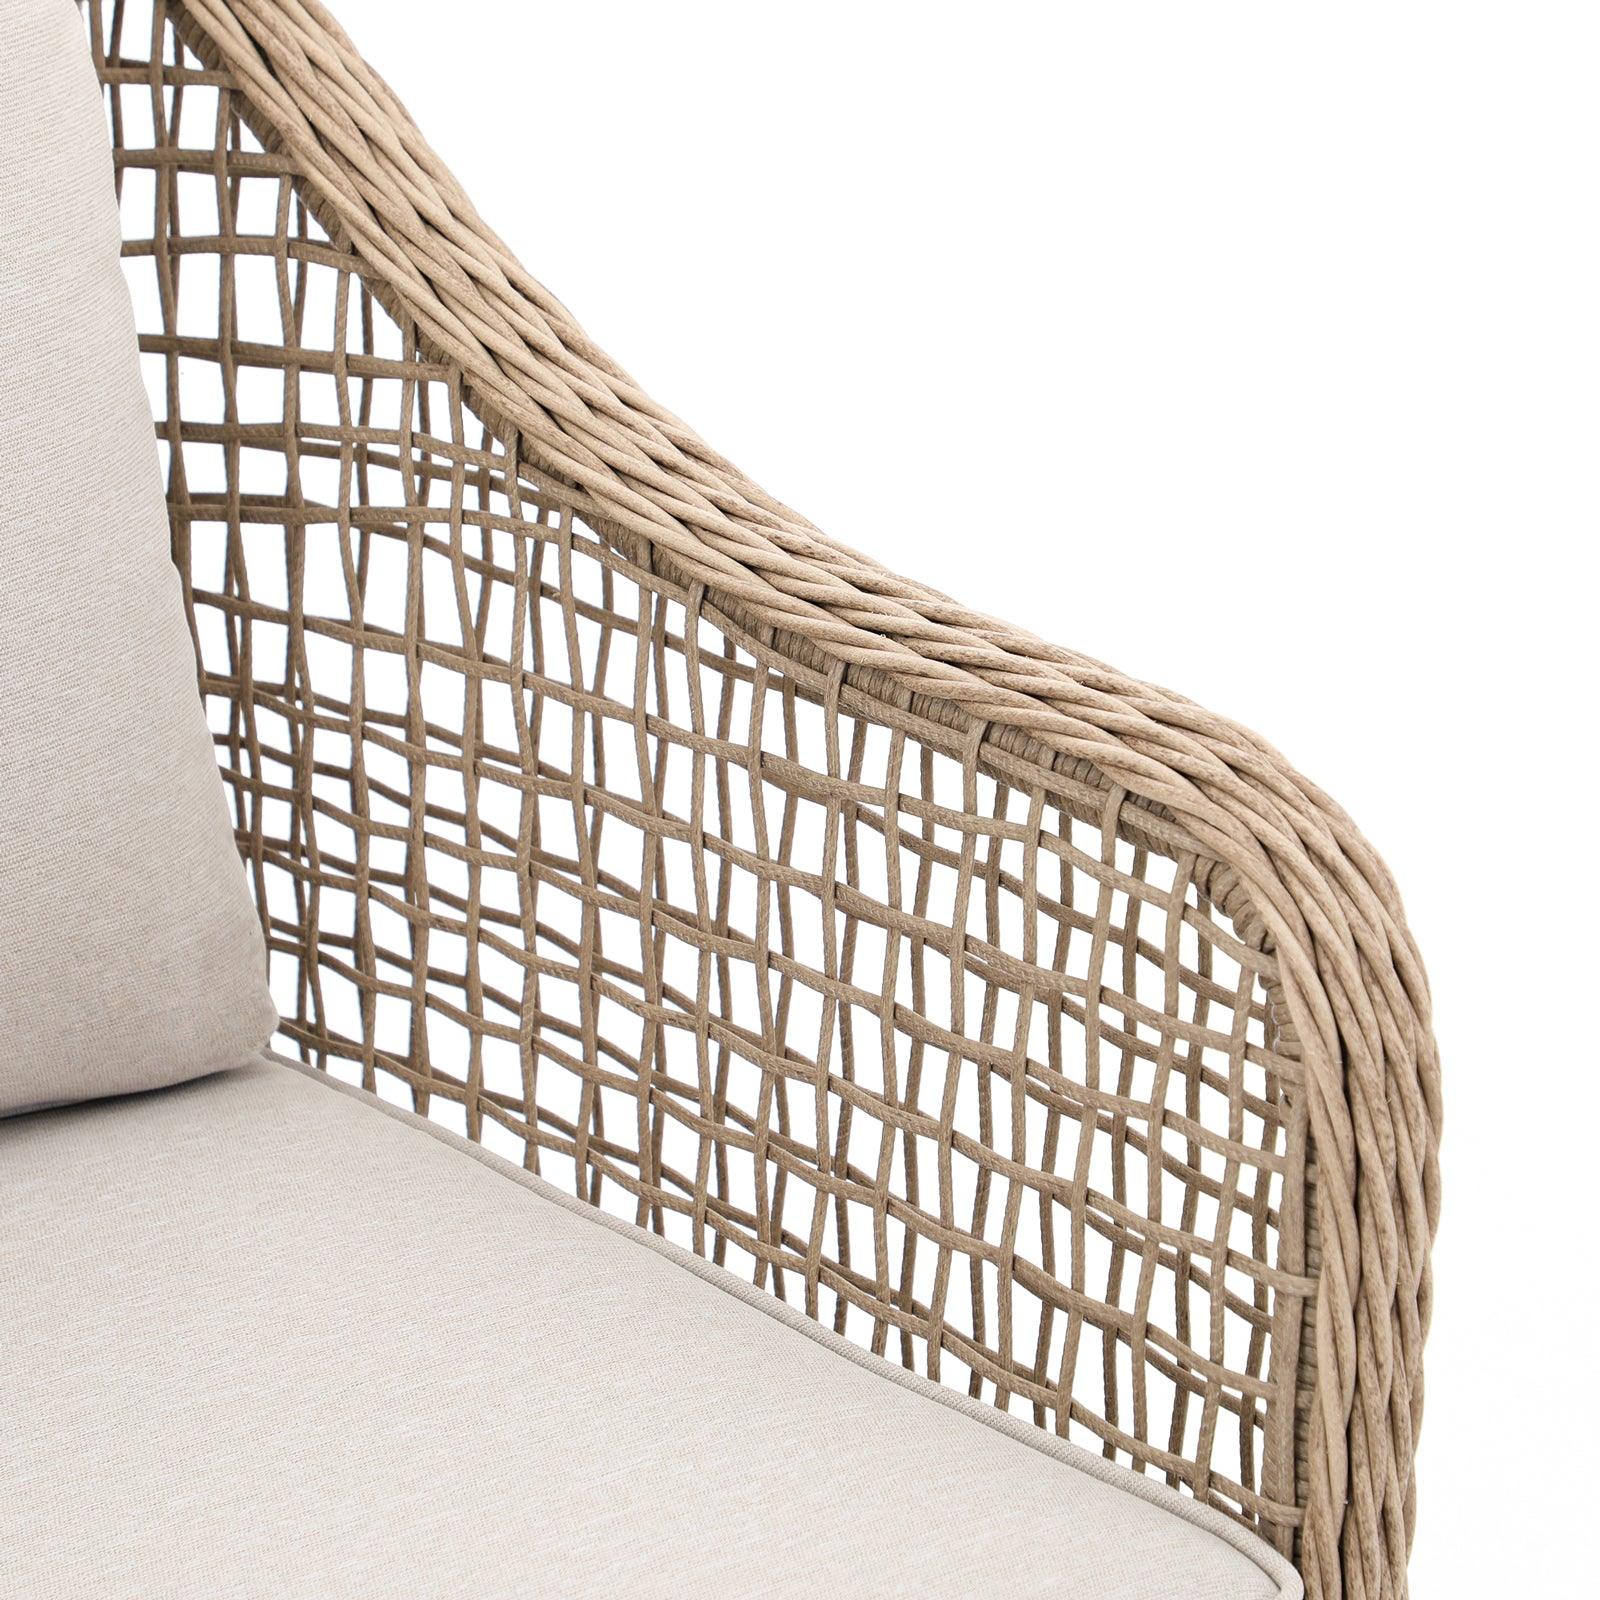 Irati natural color wicker outdoor dining chair with aluminum frame, Creamy-white cushions, wicker detail - Jardina Furniture#color_Natural